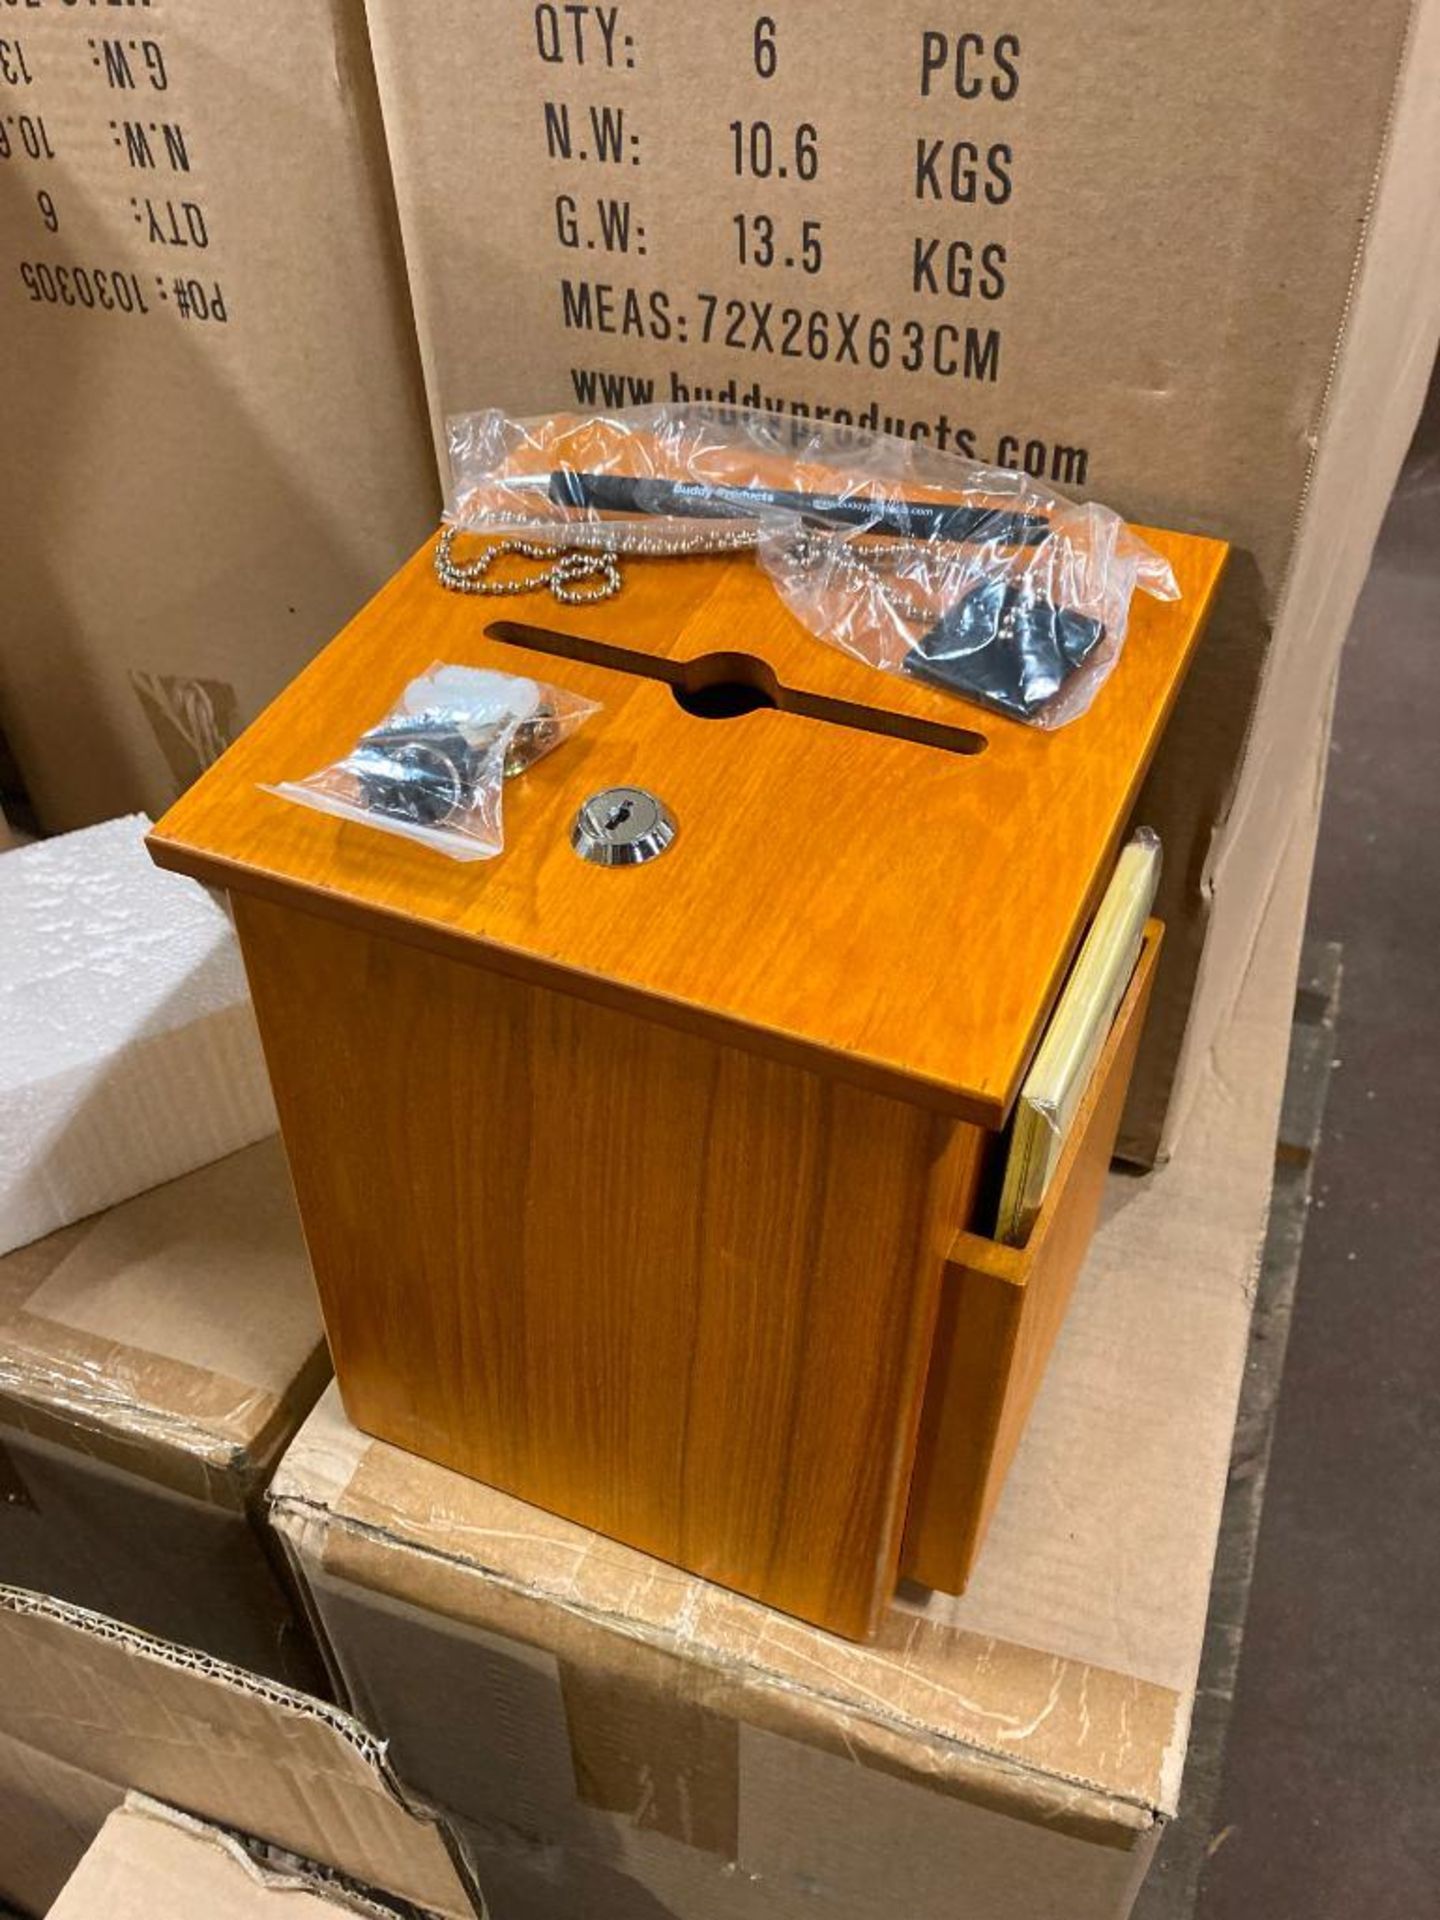 (18) CASES (NEW) OAK WOOD LOCKING SUGGESTION BOXES, CARDS AND ATTACHED CHAIN W/PEN INCLUDED, (6) PER